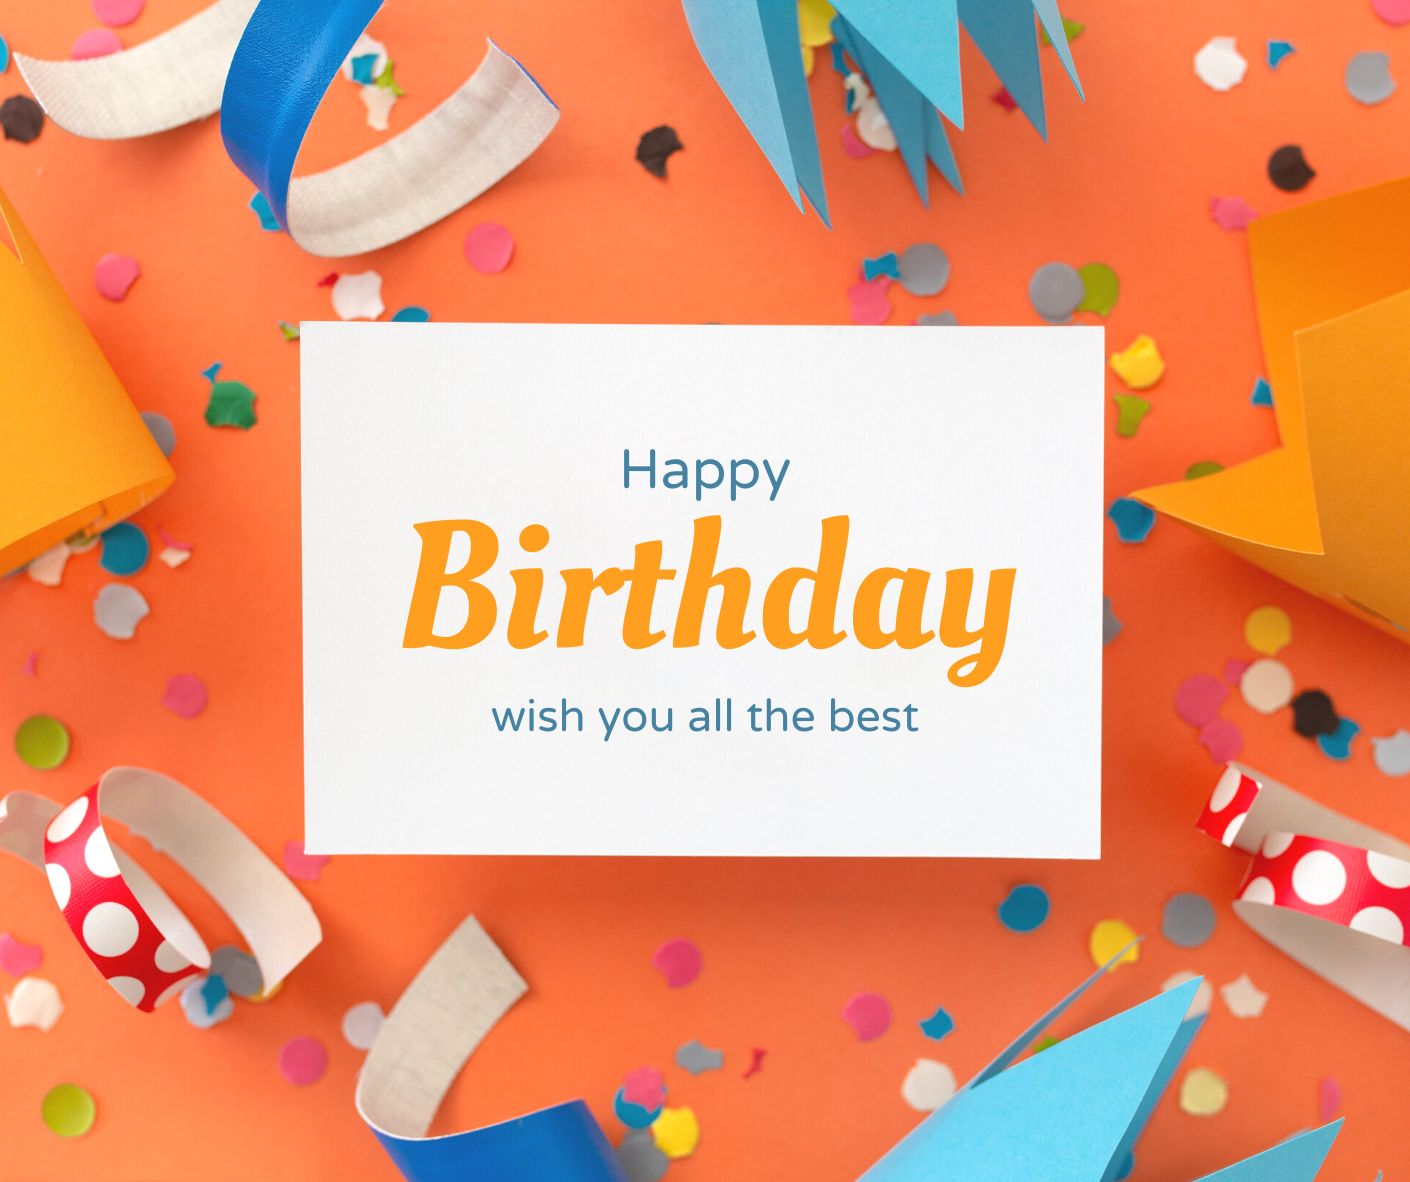 happy birthday messages with pictures